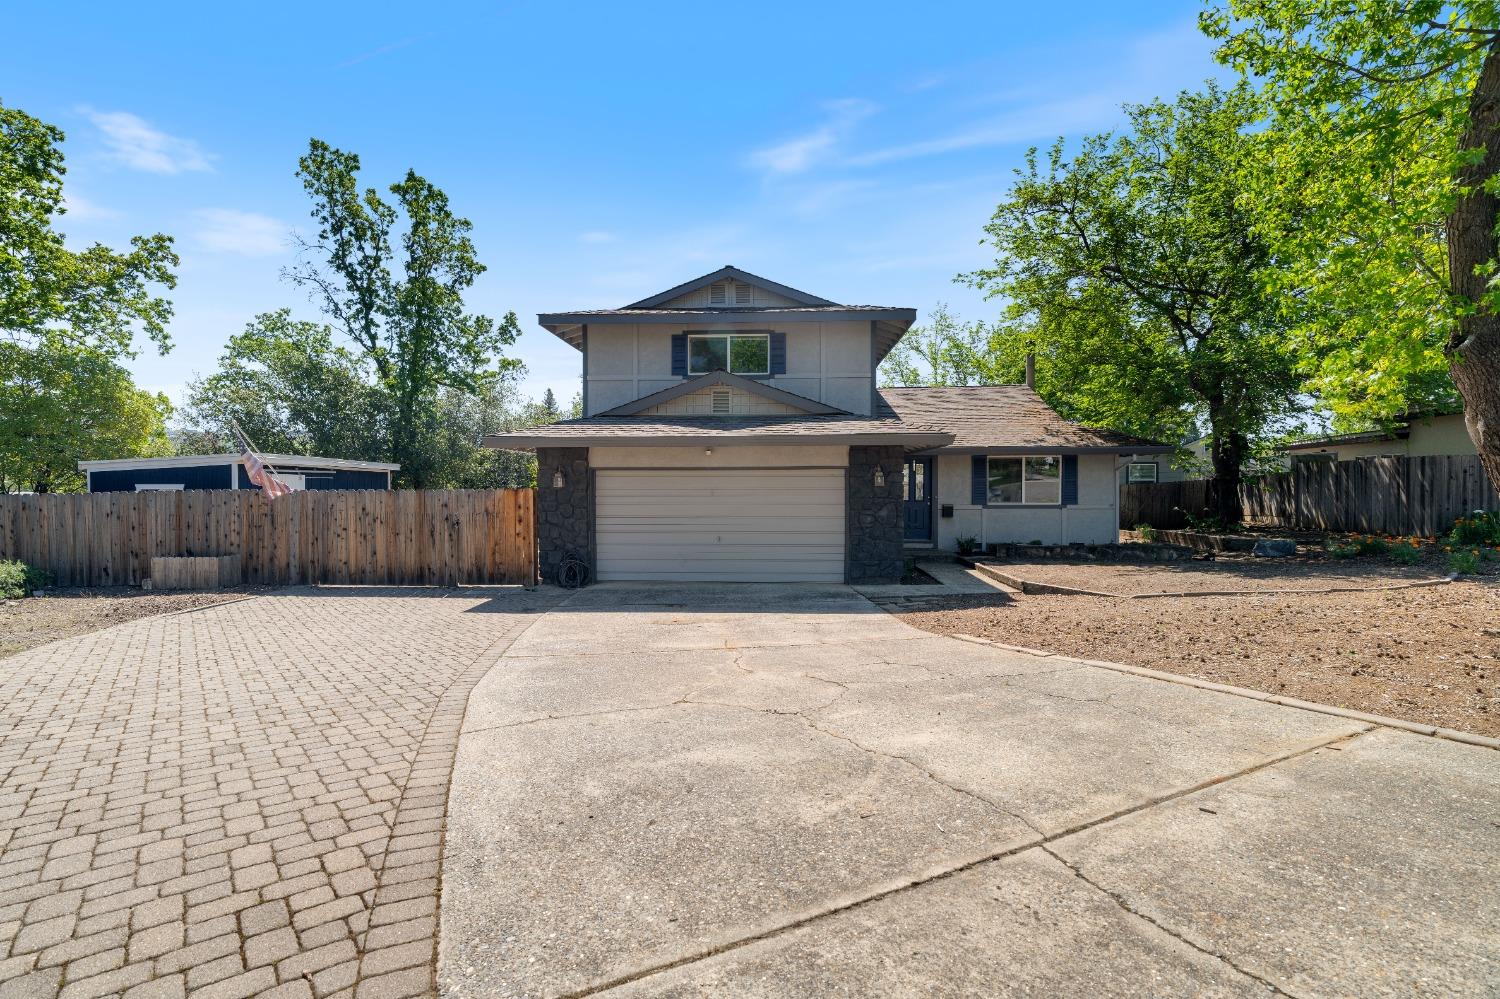 Located in end of a cul-de-sac , and has a big lot. Move in ready with a open kitchen concept and granite counter top. RV or boat parking behind the fence ,has a lot of room for parking in the front. Also has a nice ADU unit in the back.